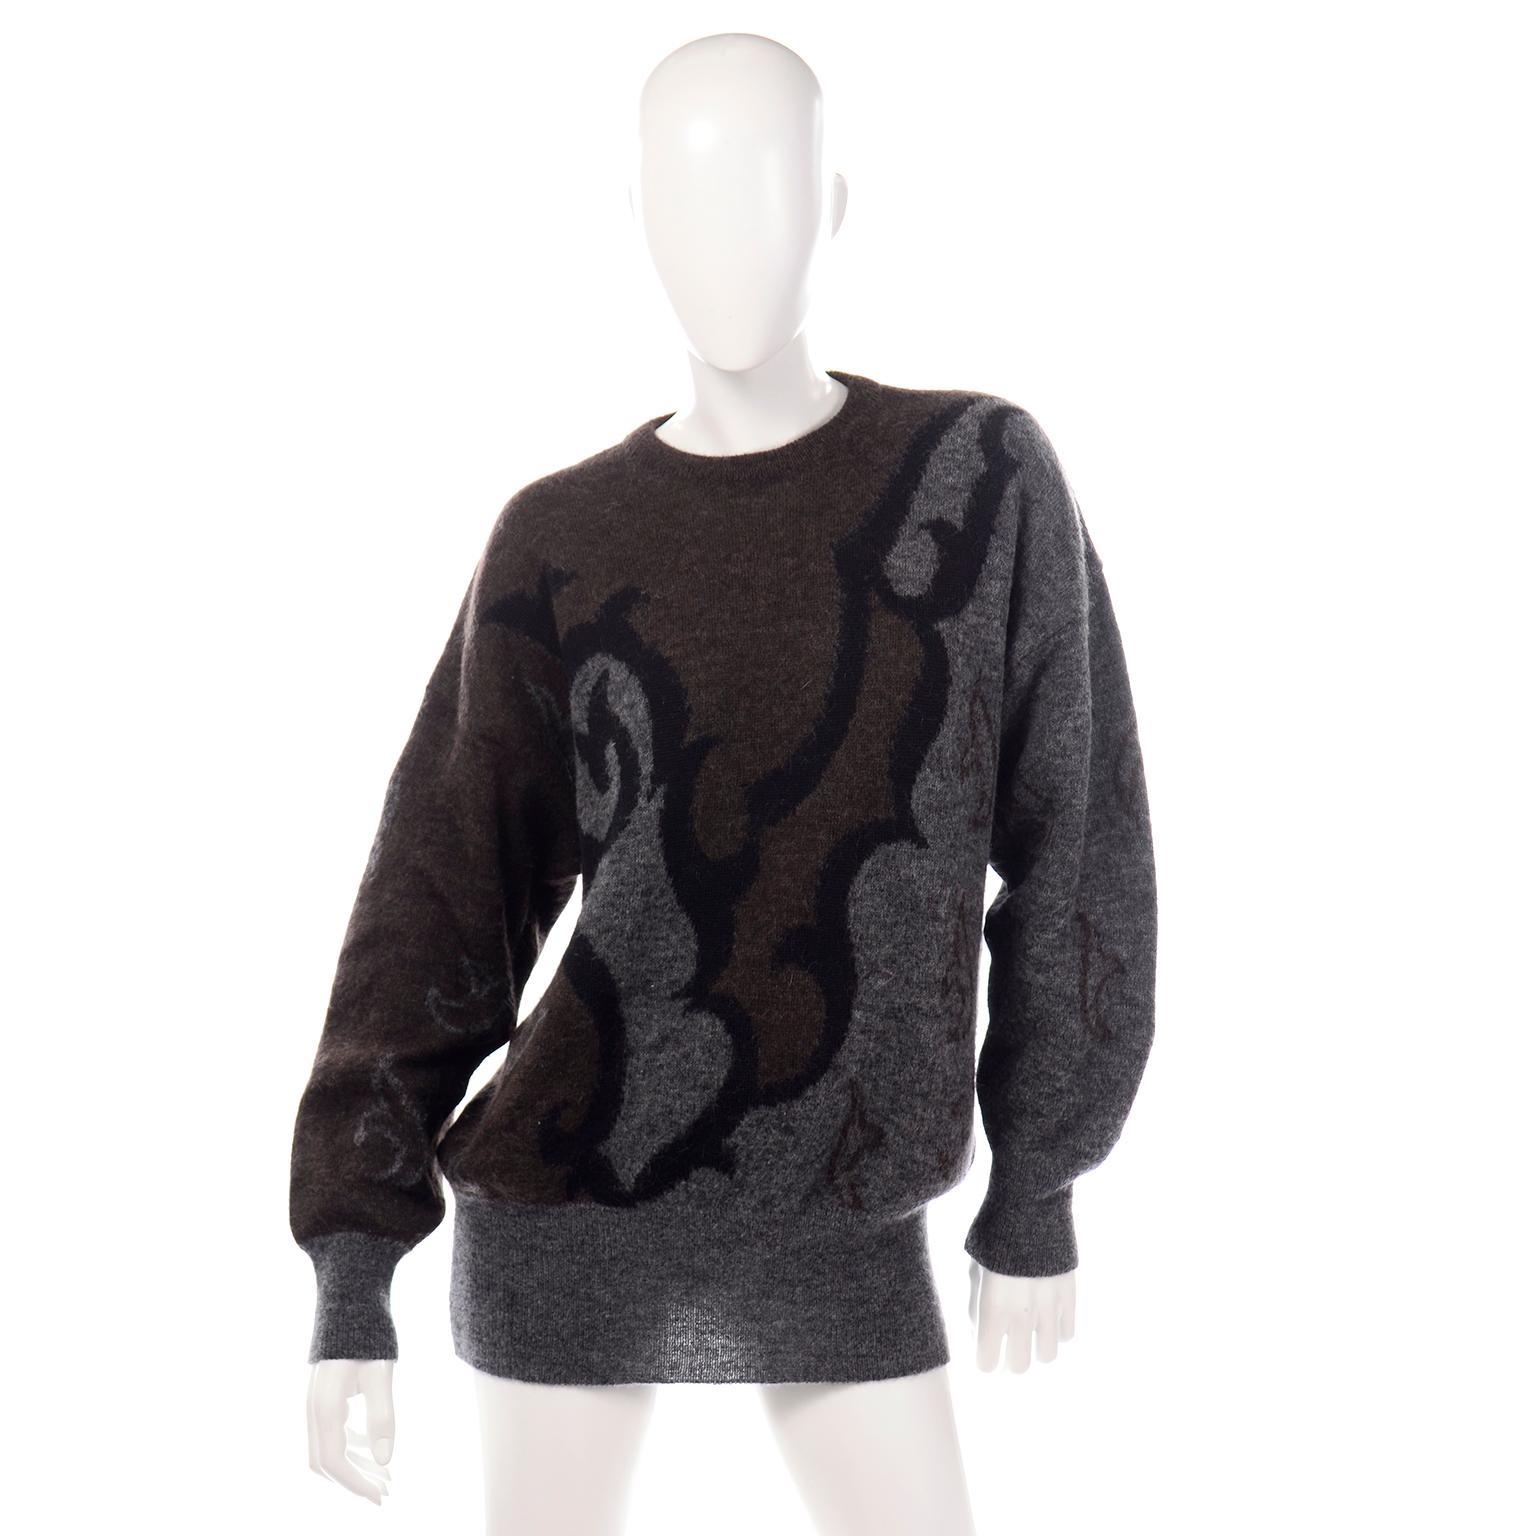 This is an amazing Escada sweater that was designed by Margaretha Ley in the 1980's. The sweater is oversized with lovely long slightly balloon style sleeves,  in a gray, black, and brown woven abstract print throughout. This sweater does not have a